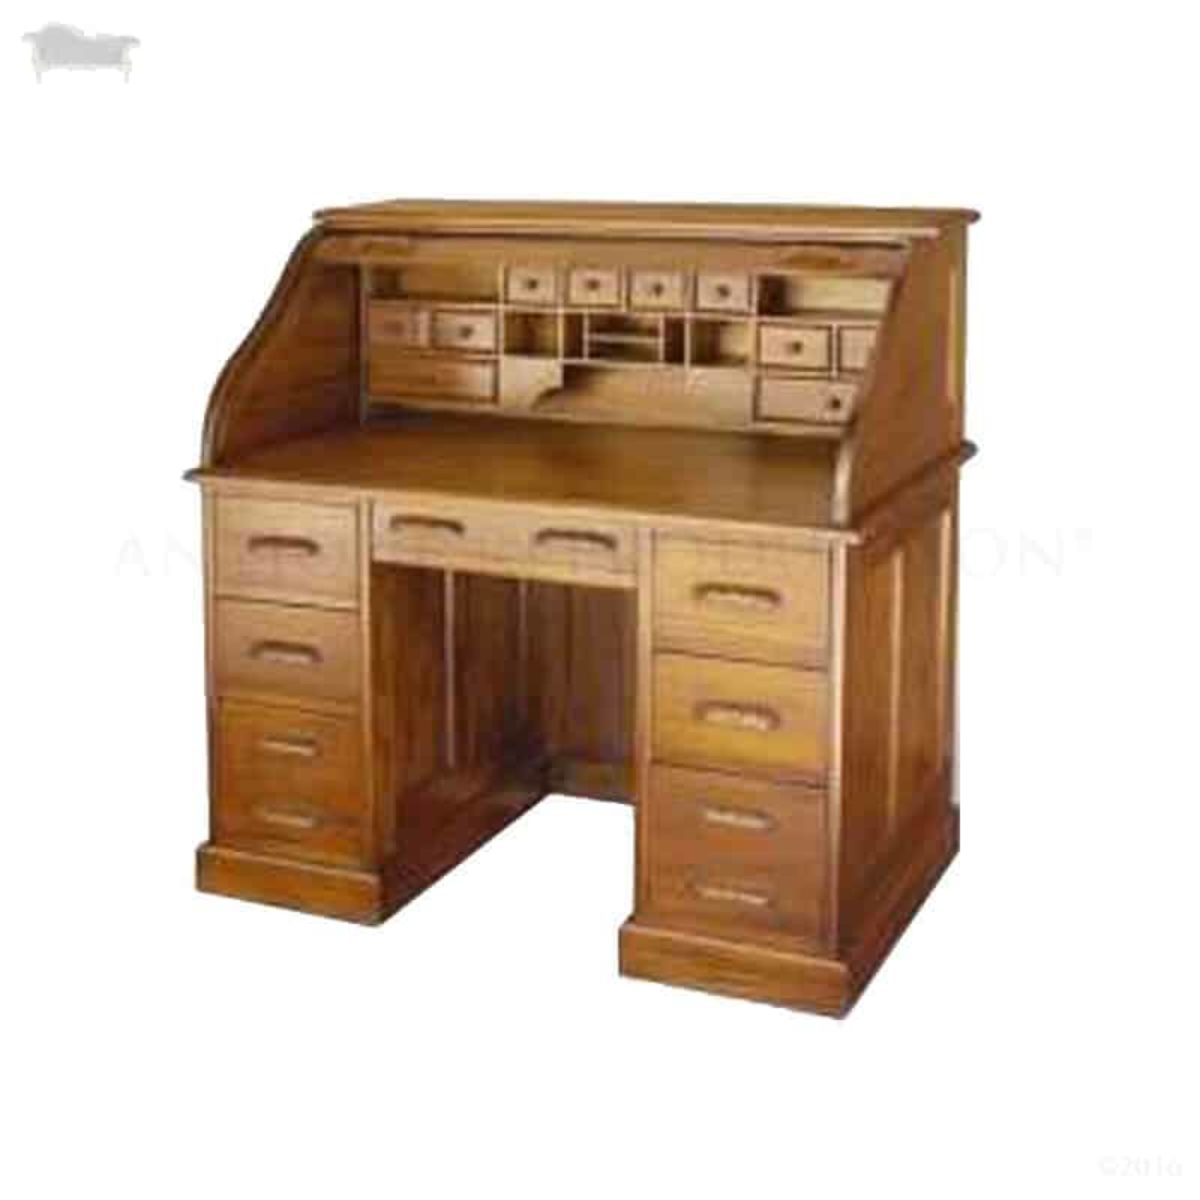  Roll Top Desk Solid Oak Wood - 54 Inch Deluxe Executive Rolltop  Desk Burnished Walnut Stain for Home Office Secretary Organizer Roll Hutch  Top Easy Assembly Quality Crafted Construction : Home